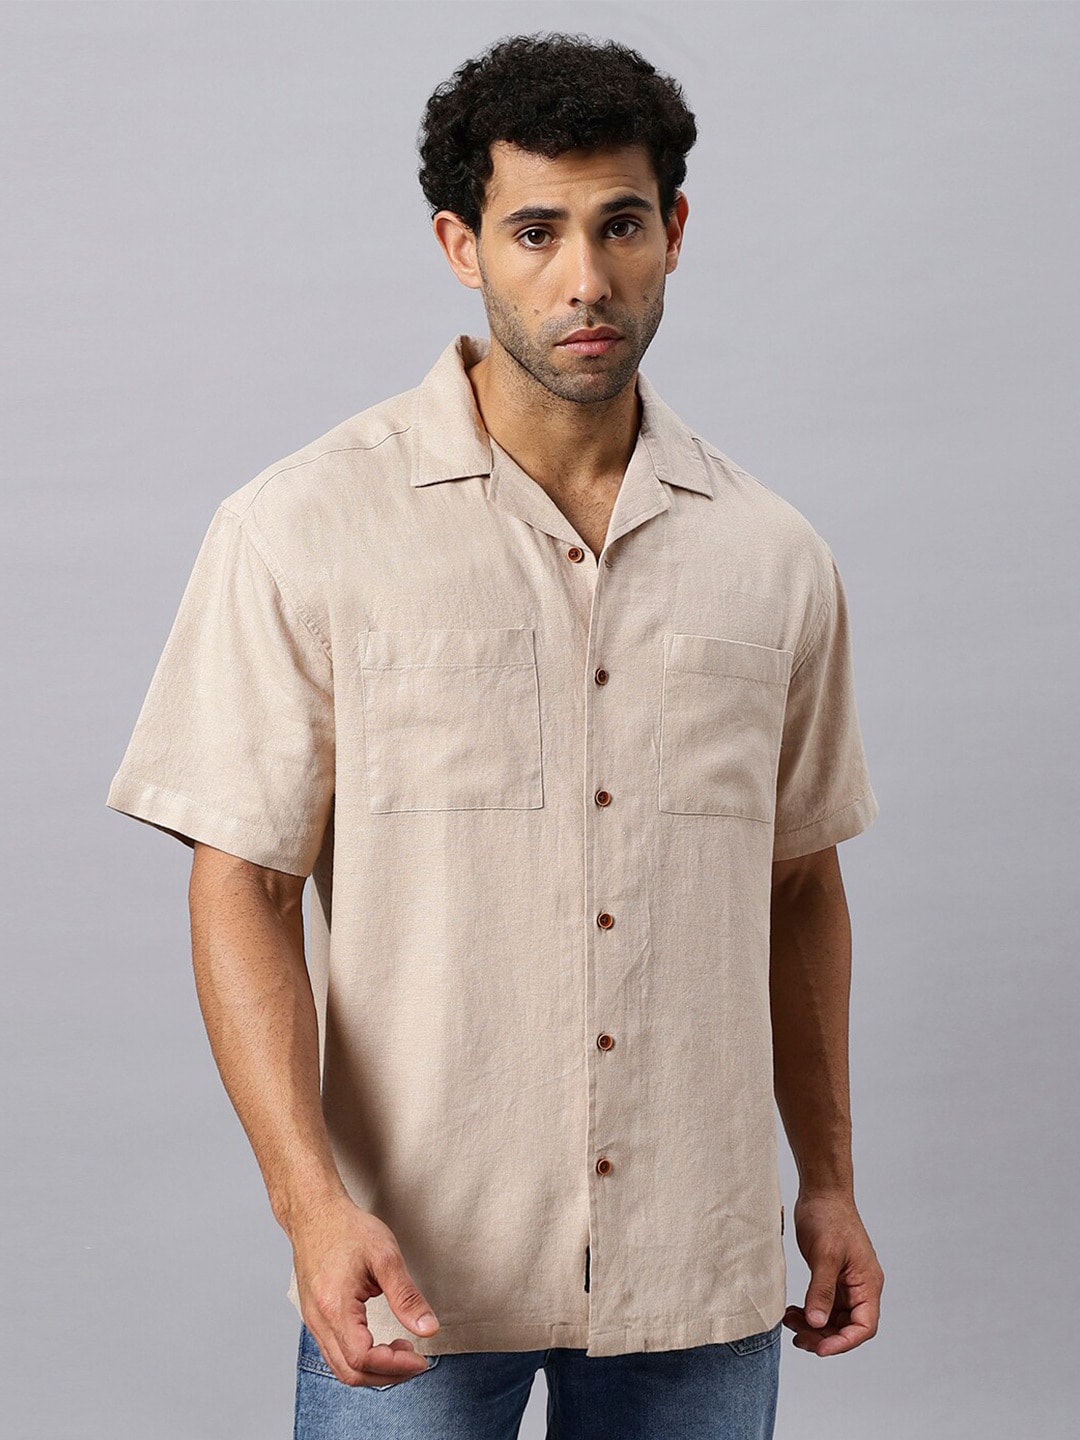 The Roadster Lifestyle Co. Beige Relaxed Short Sleeved Casual Shirts